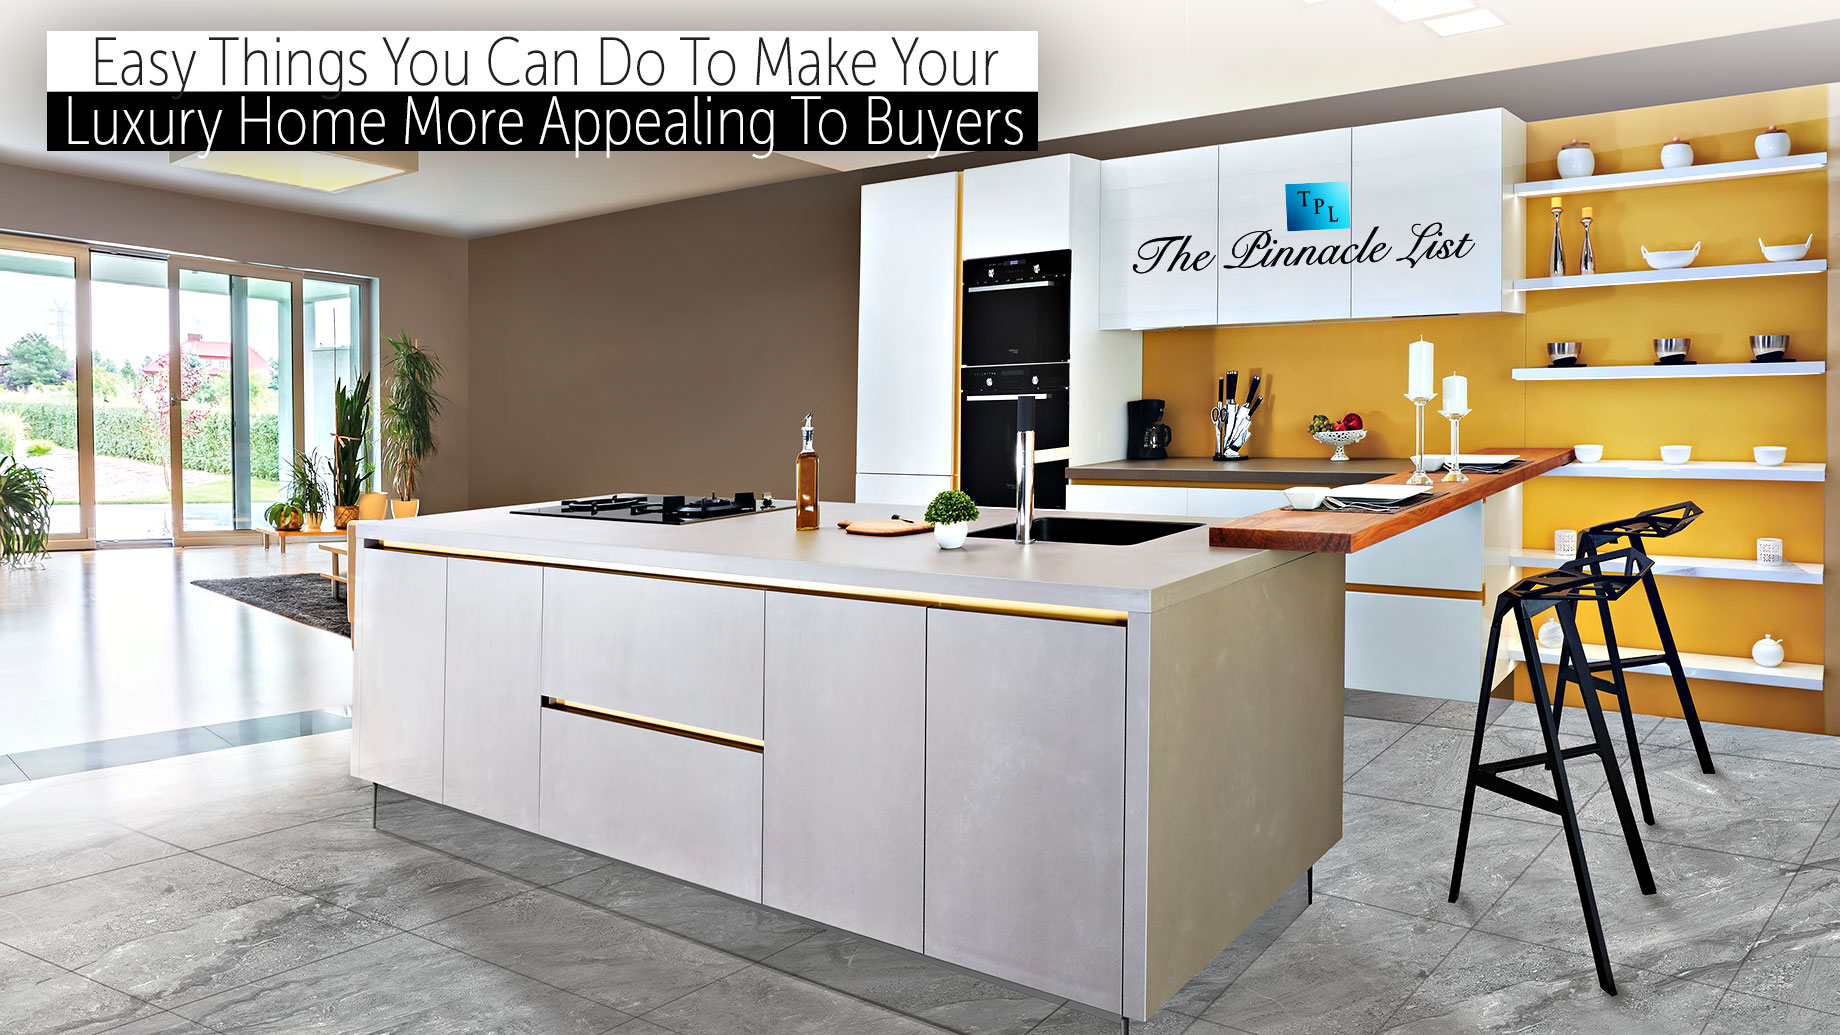 Easy Things You Can Do To Make Your Luxury Home More Appealing To Buyers